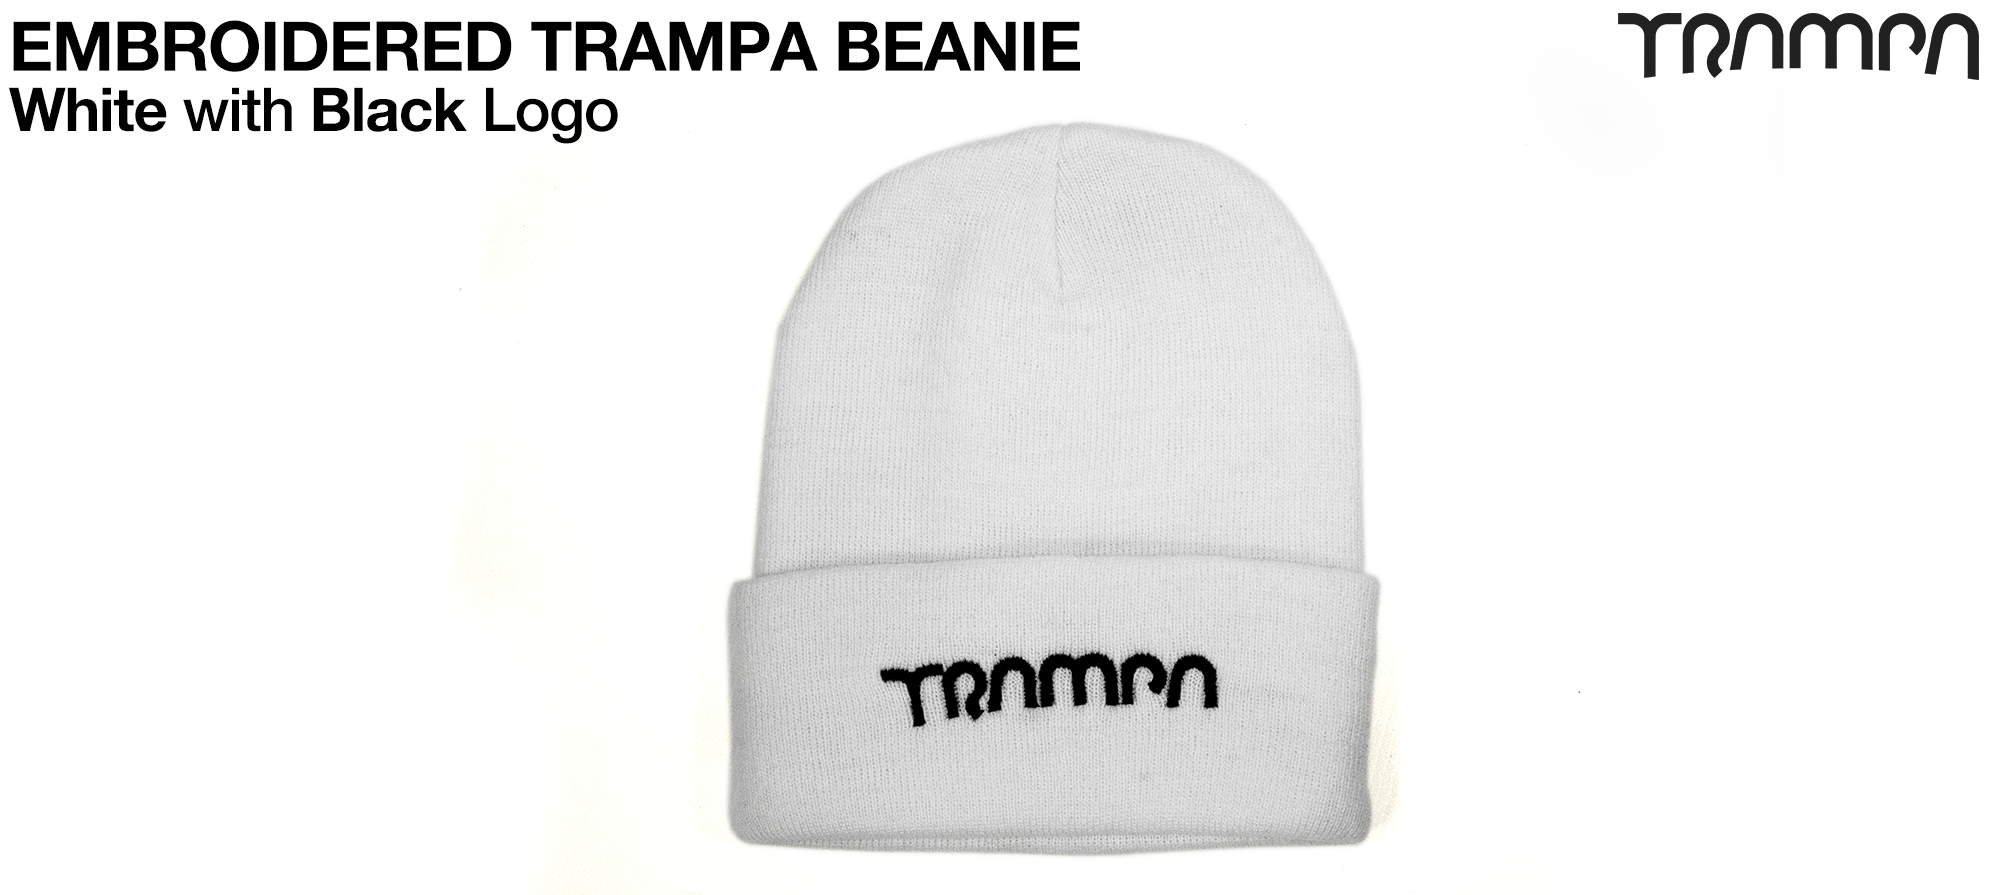 WHITE Wooli Hat with BLACK TRAMPA Embroidery - Double thick turn over for extra warmth